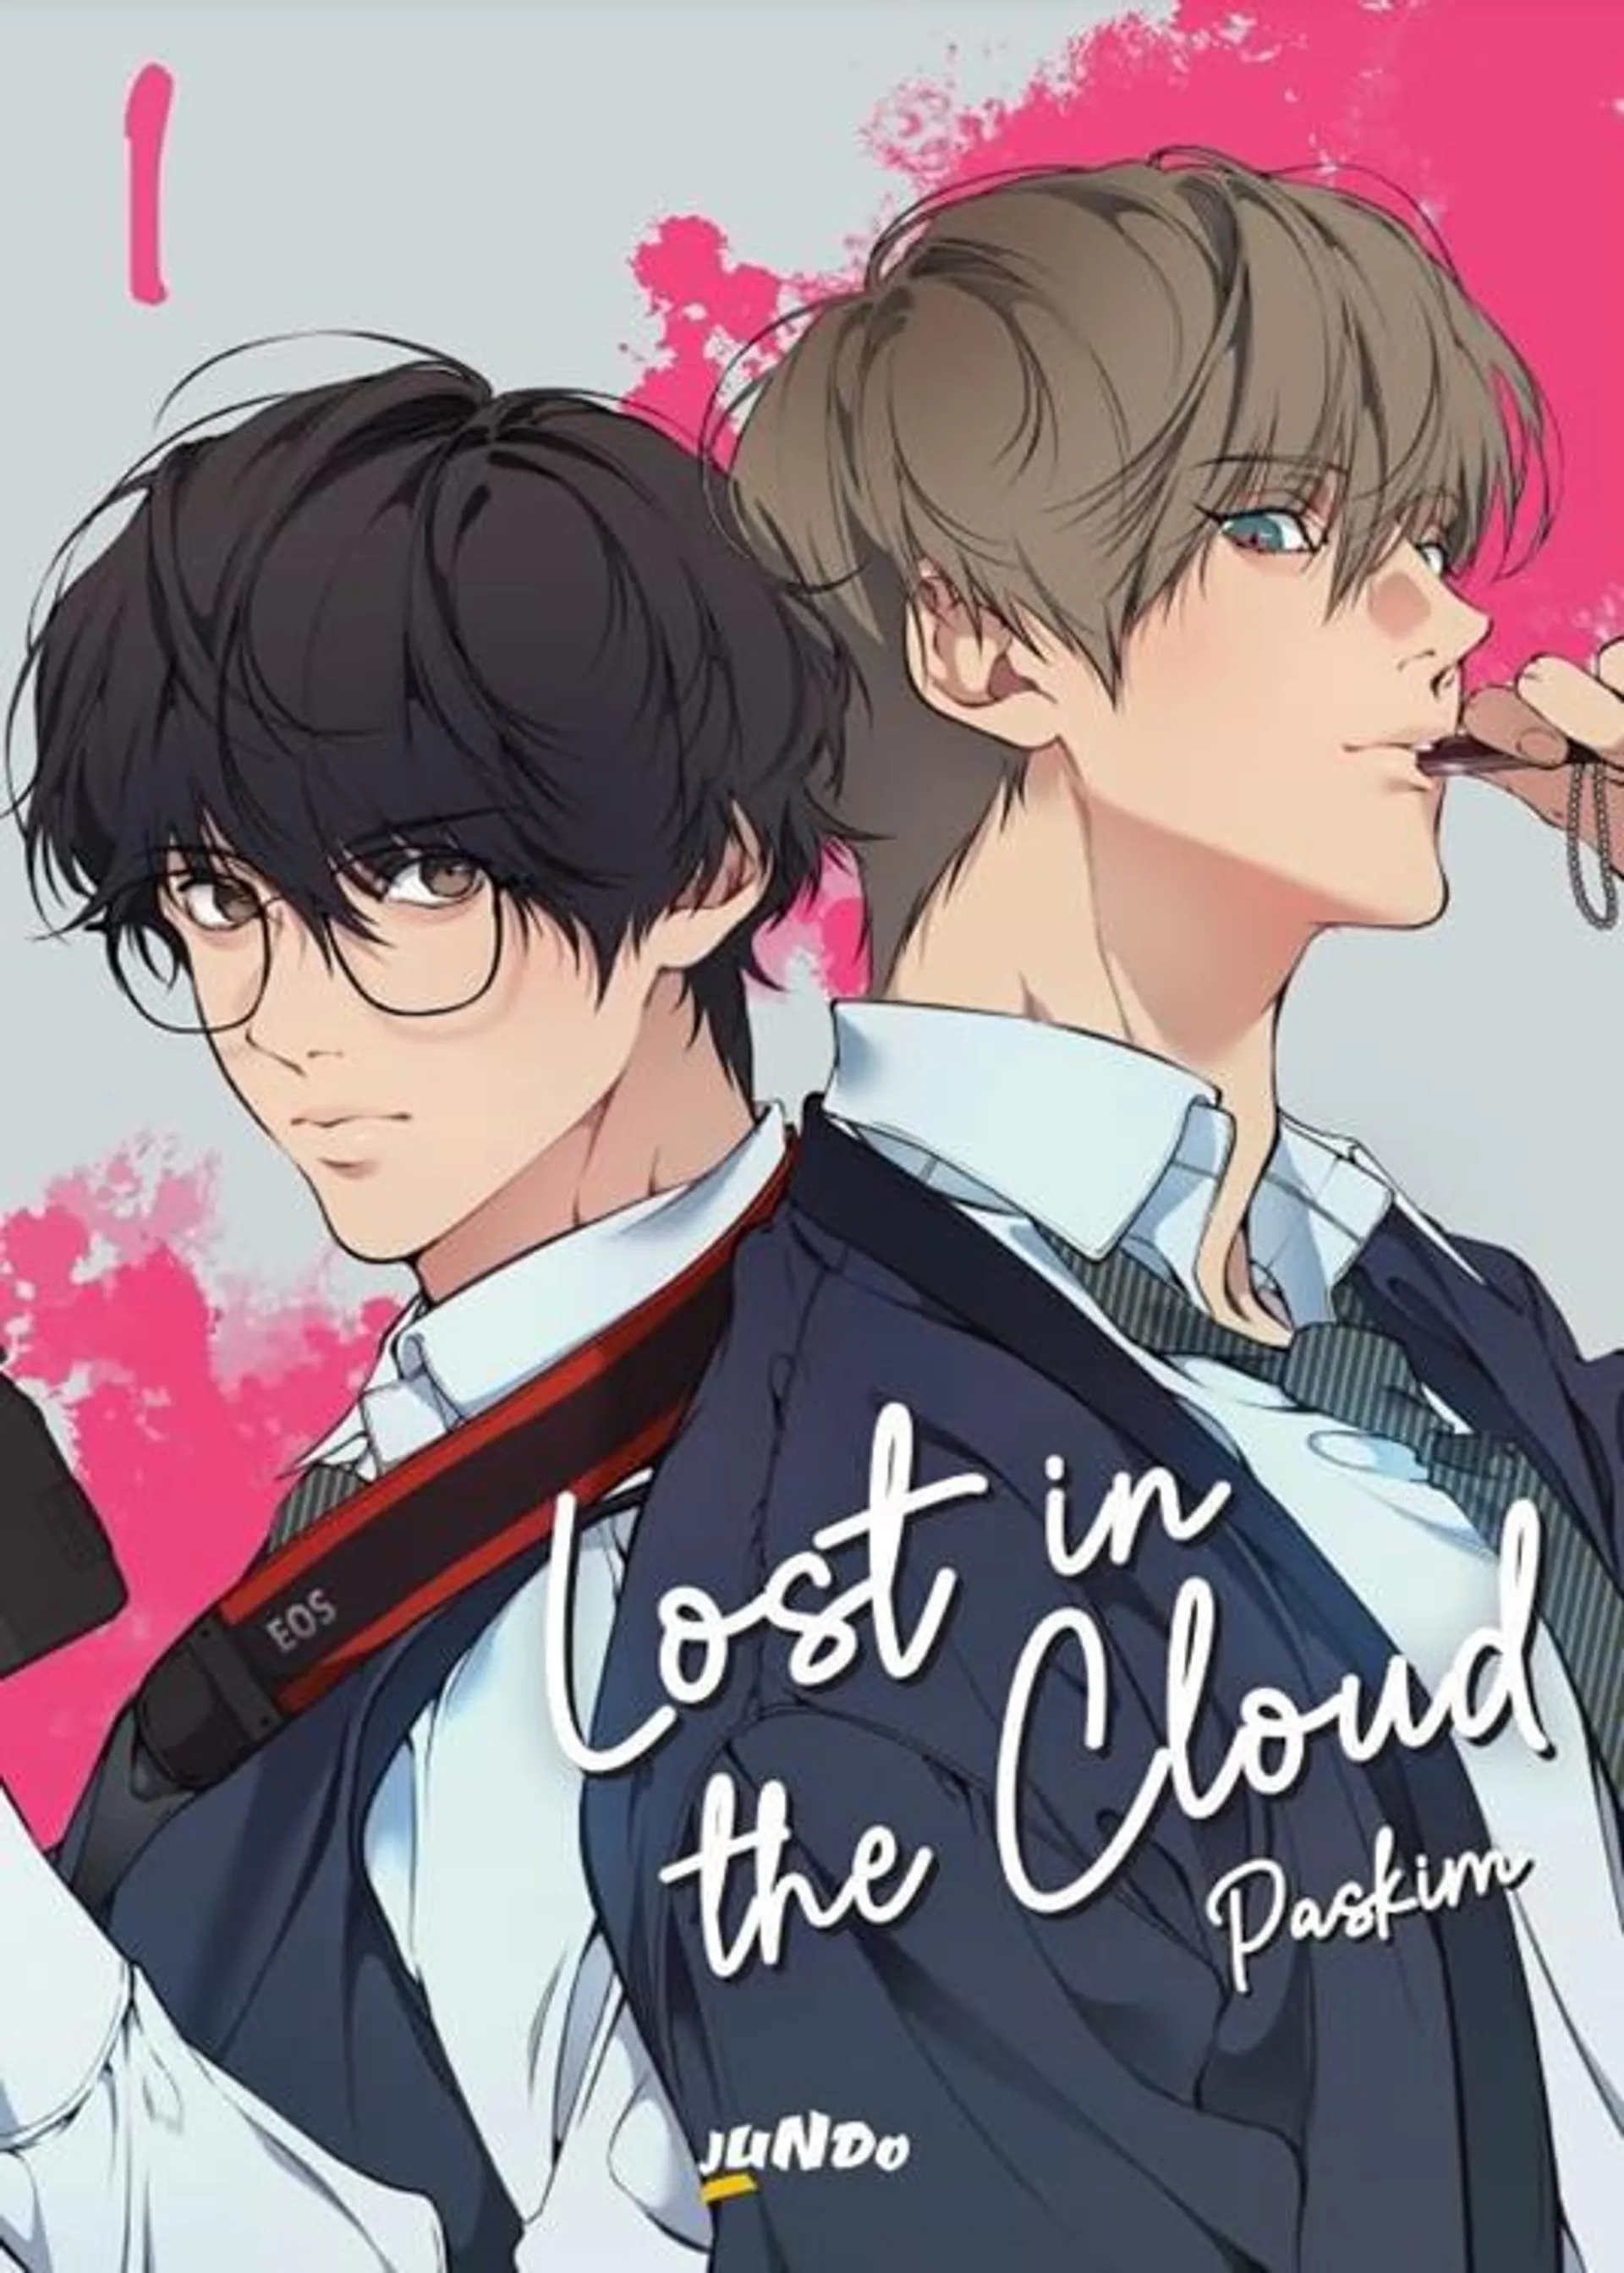 Lost in the cloud. Vol. 1